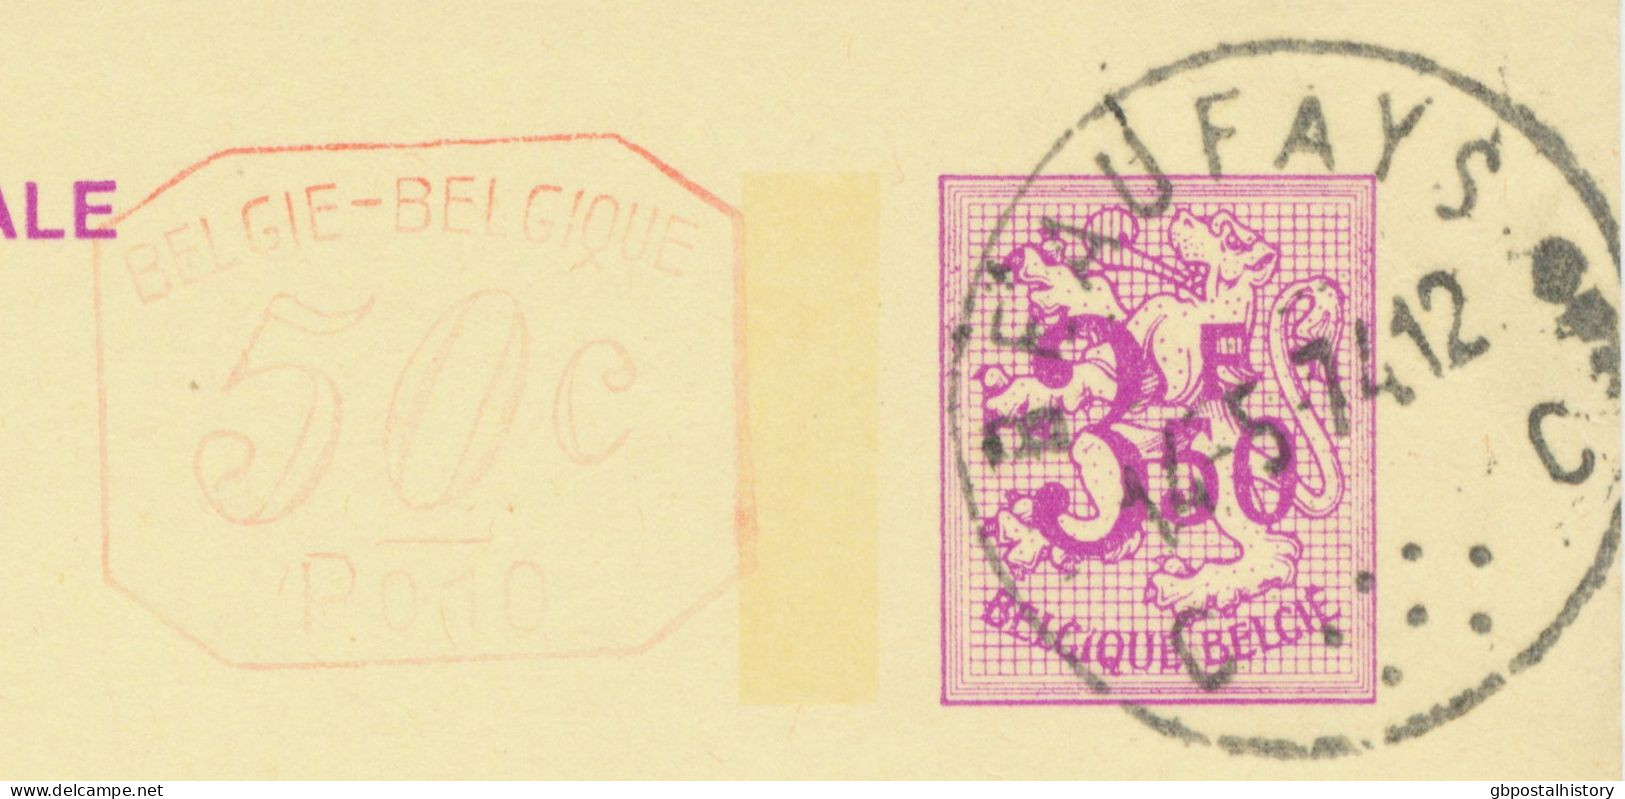 BELGIUM VILLAGE POSTMARKS  BEAUFAYS C (now Chaudfontaine) SC With Dots 1974 (Postal Stationery 3,50 + 0,50 F, PUBLIBEL 2 - Annulli A Punti